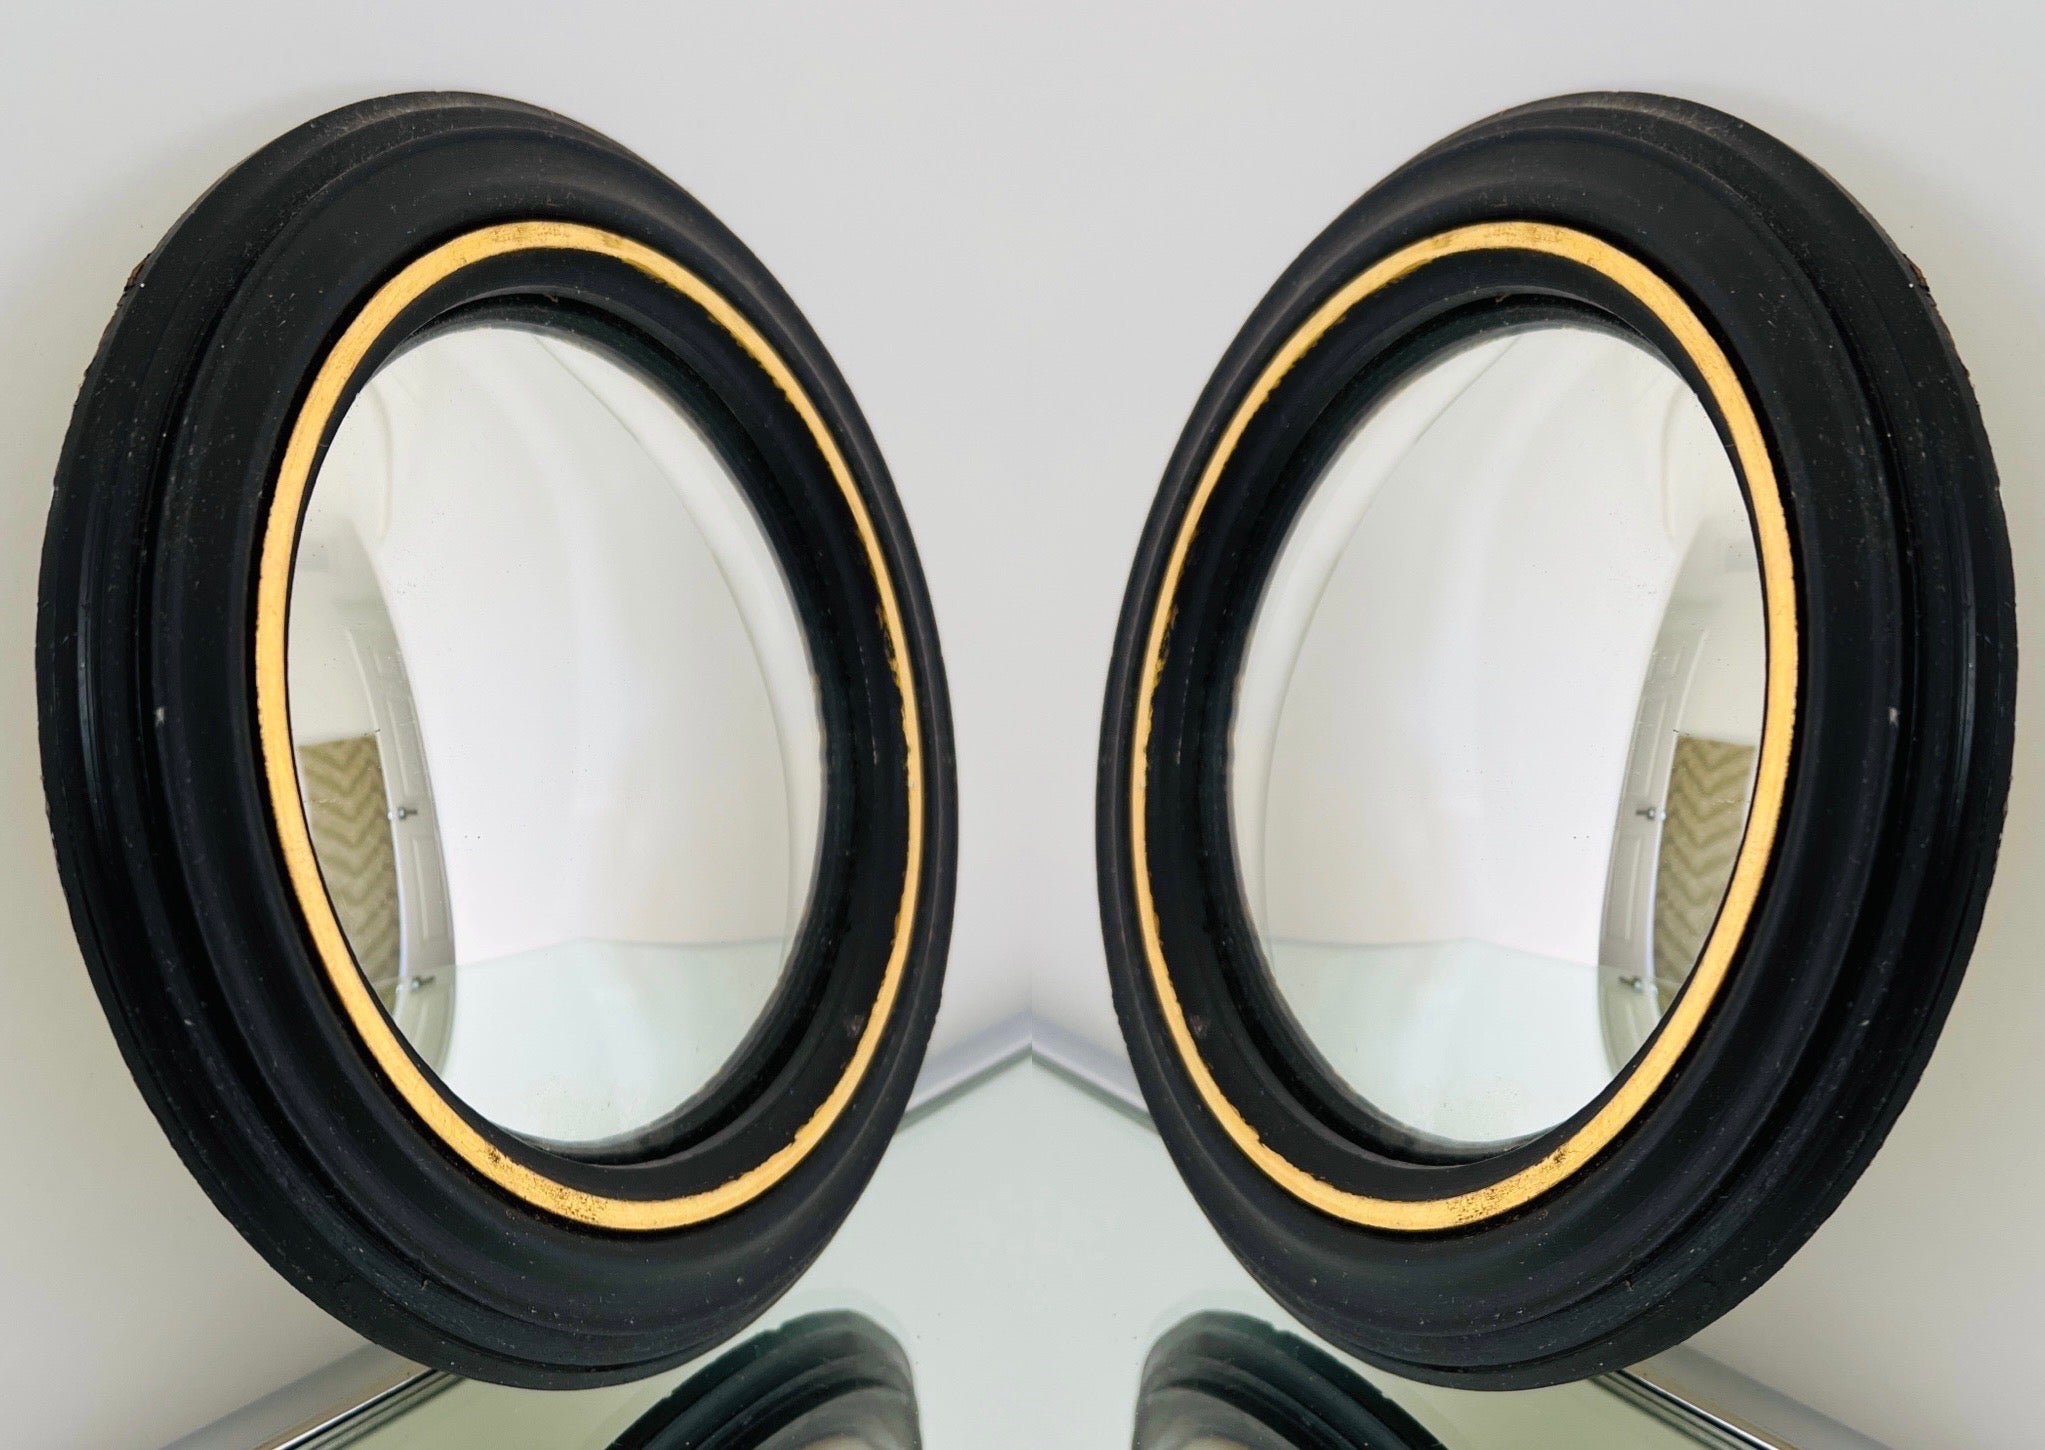 English Regency style small convex mirrors with round molded plaster frames.  Hand-carved design featuring fluted rims, with ebony finish and distressed gold leaf accent.  Used throughout centuries, bullseye mirrors add an architectural element to a